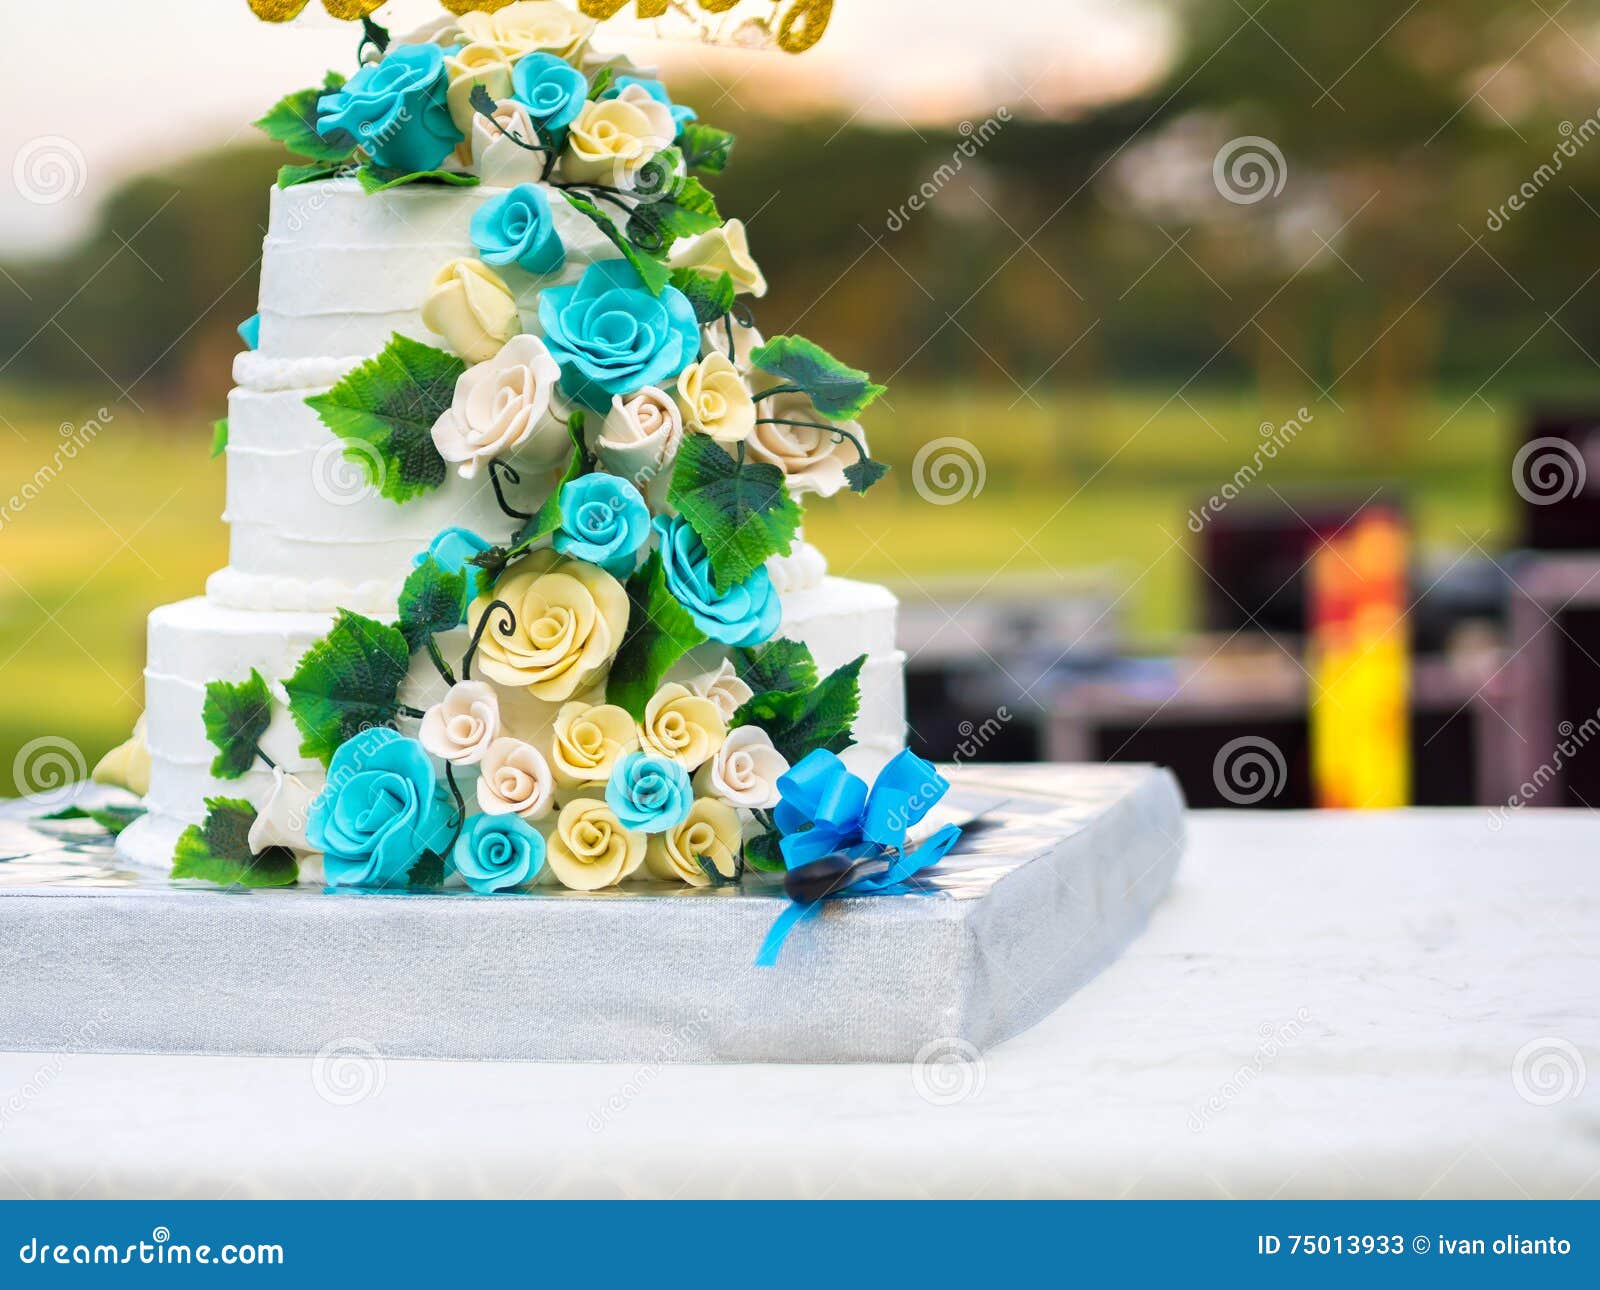 Beautiful Wedding Cake with Blue and Yellow Roses Stock Image ...